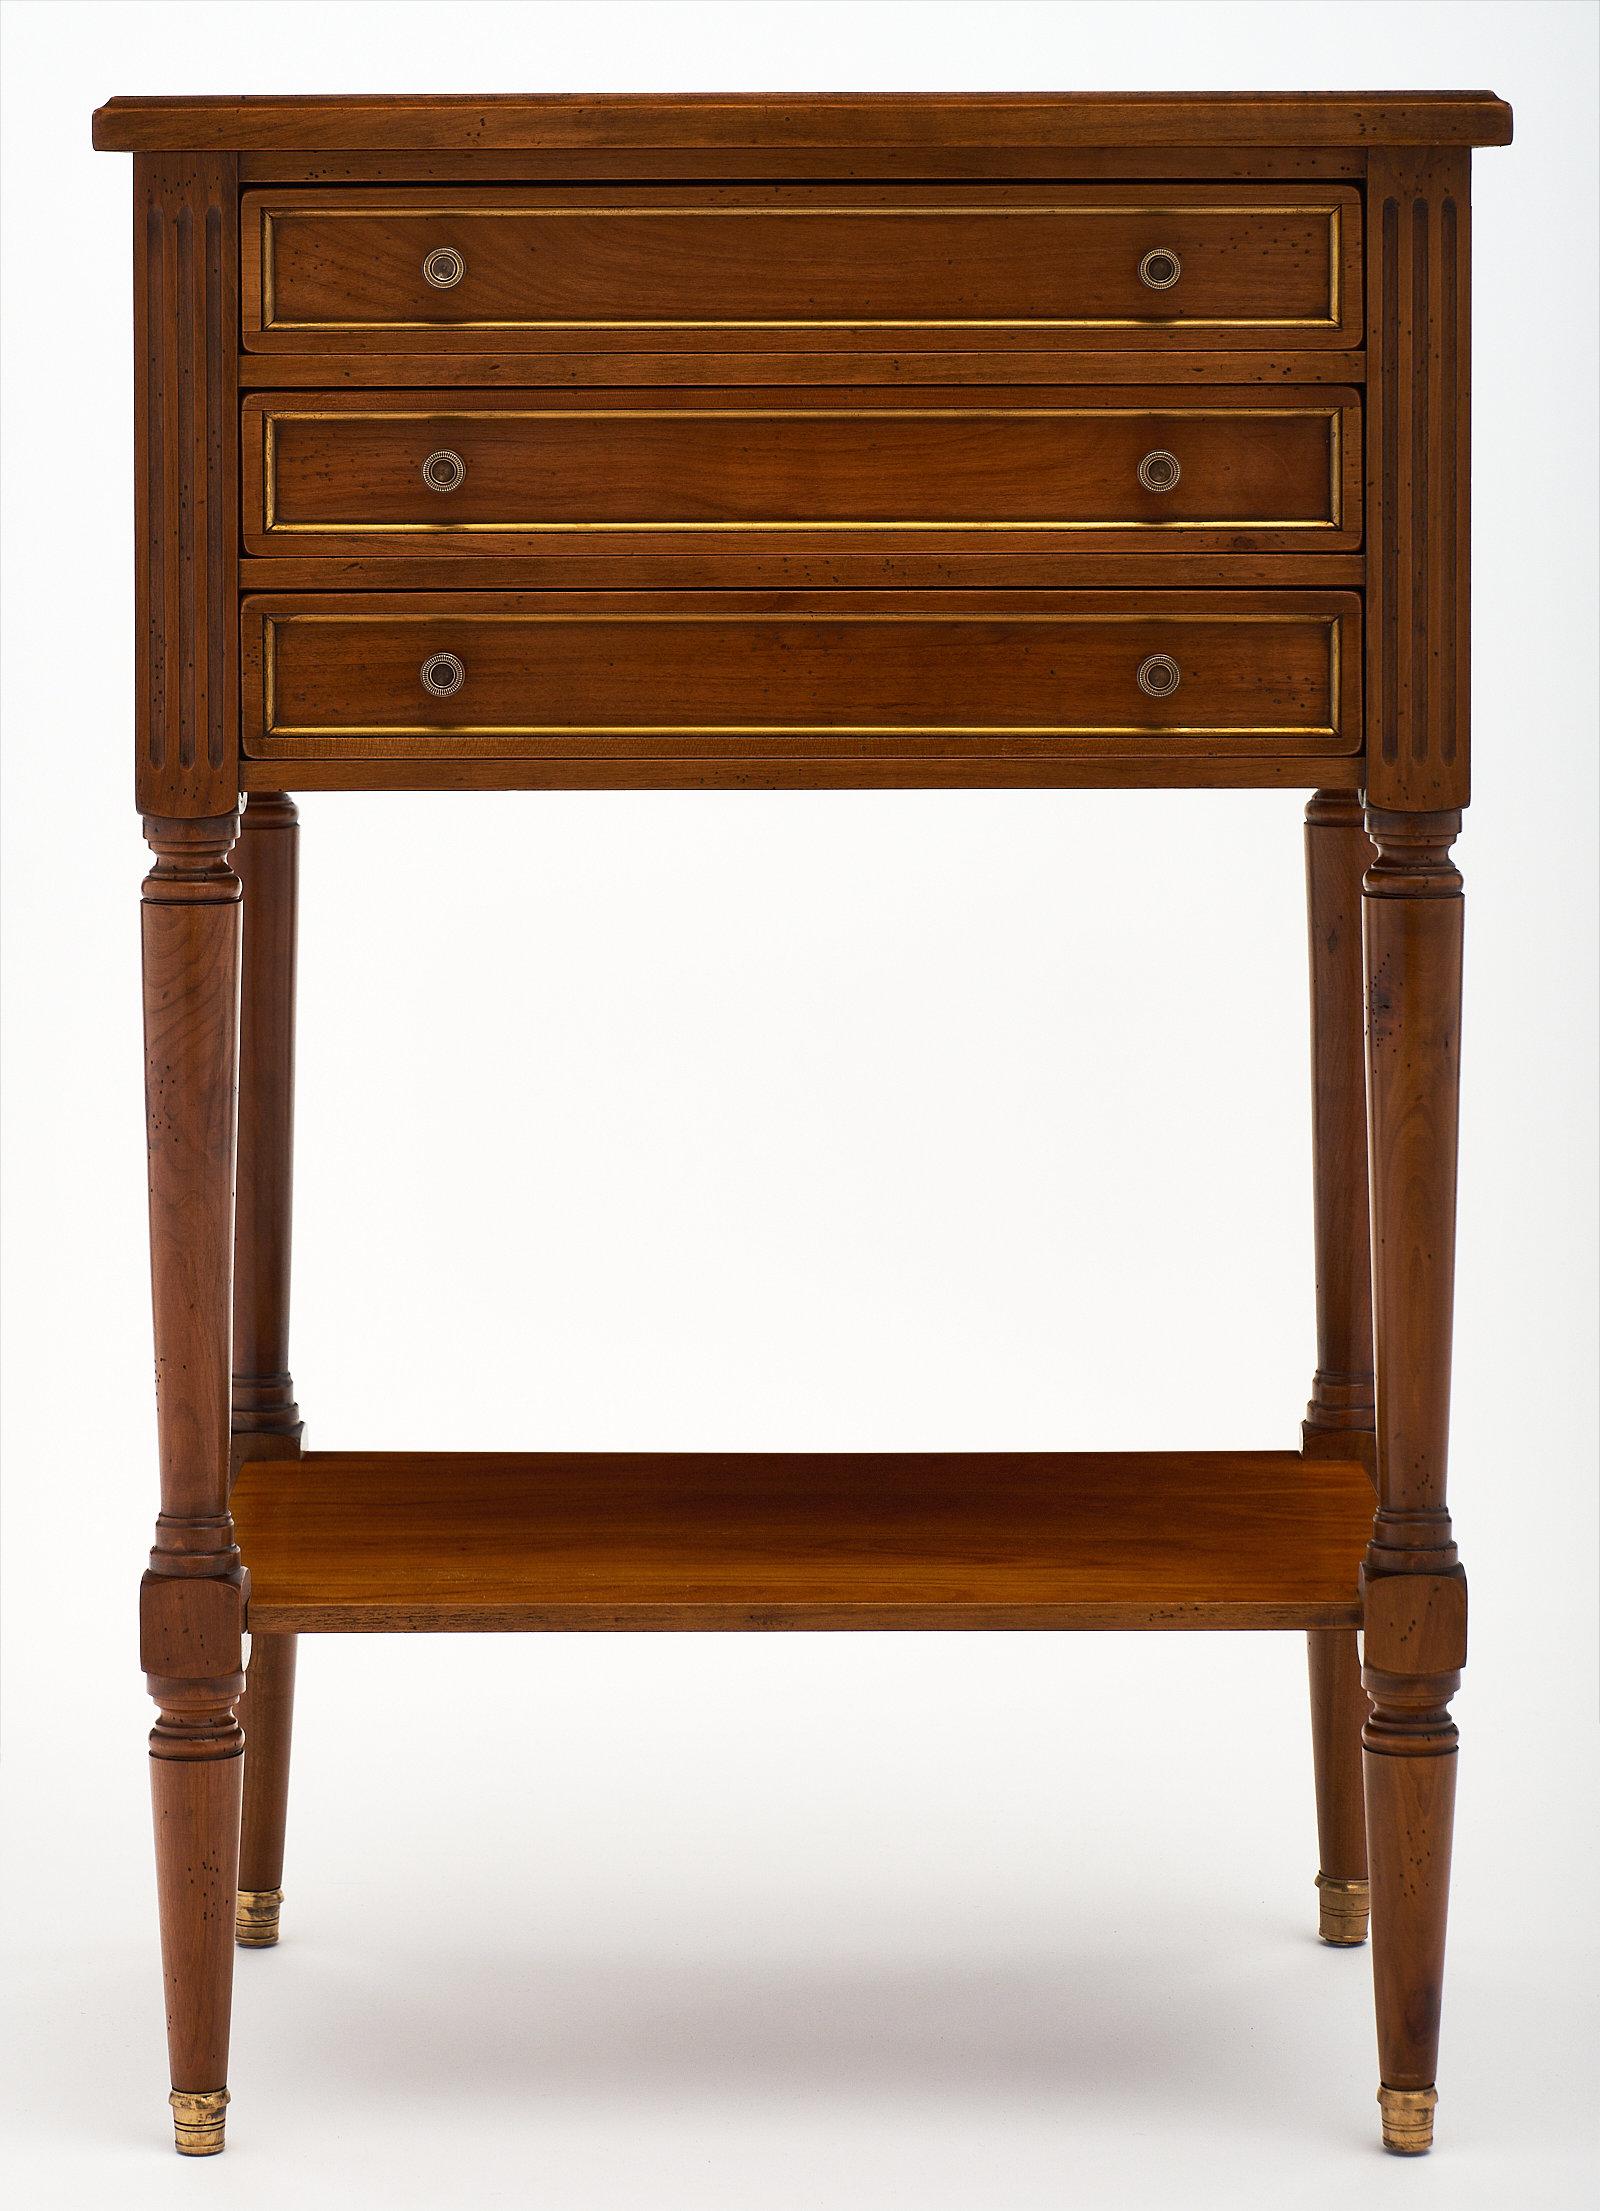 A refined Louis XVI style side table featuring three dovetailed drawers and a bottom shelf. This elegant piece is made of cheerywood and has a warm tone to the wood. Original hardware and brass capped feet!